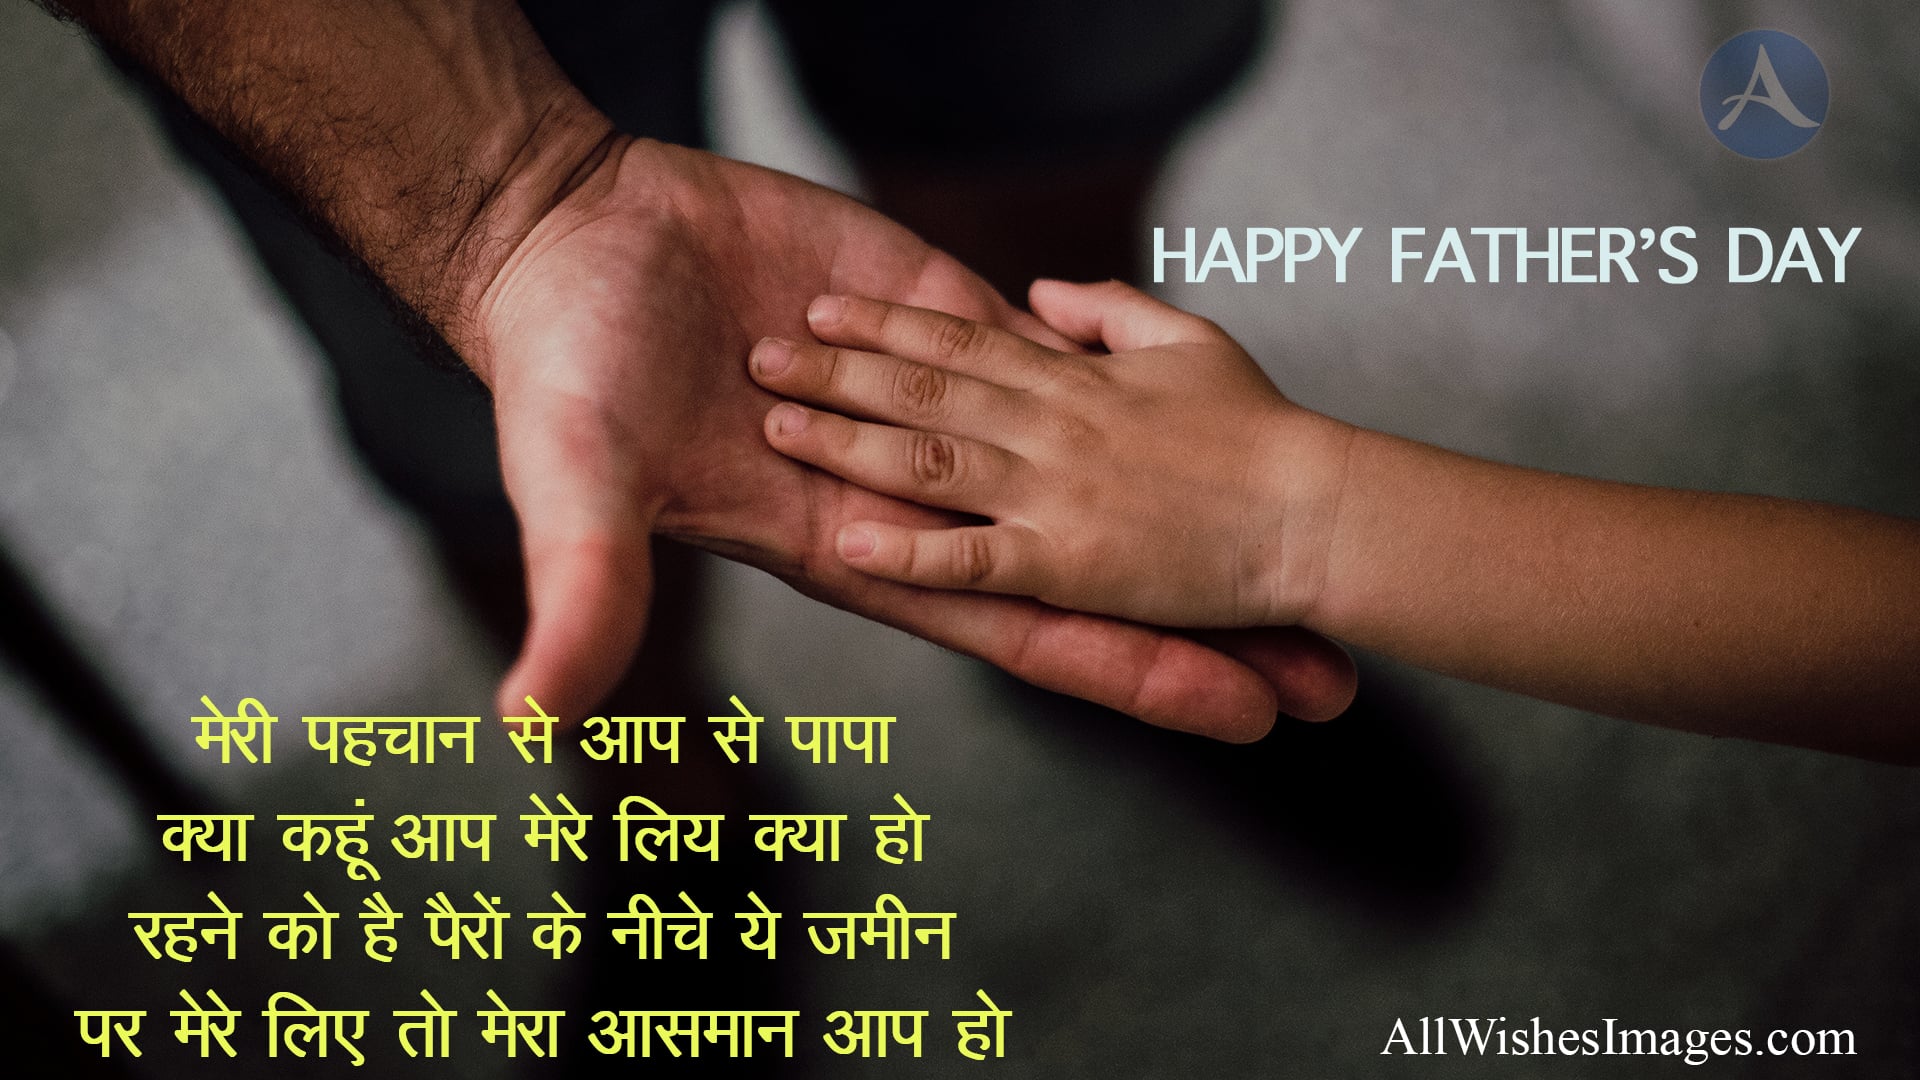 special fathers day img quotes - All Wishes Images - Images for WhatsApp